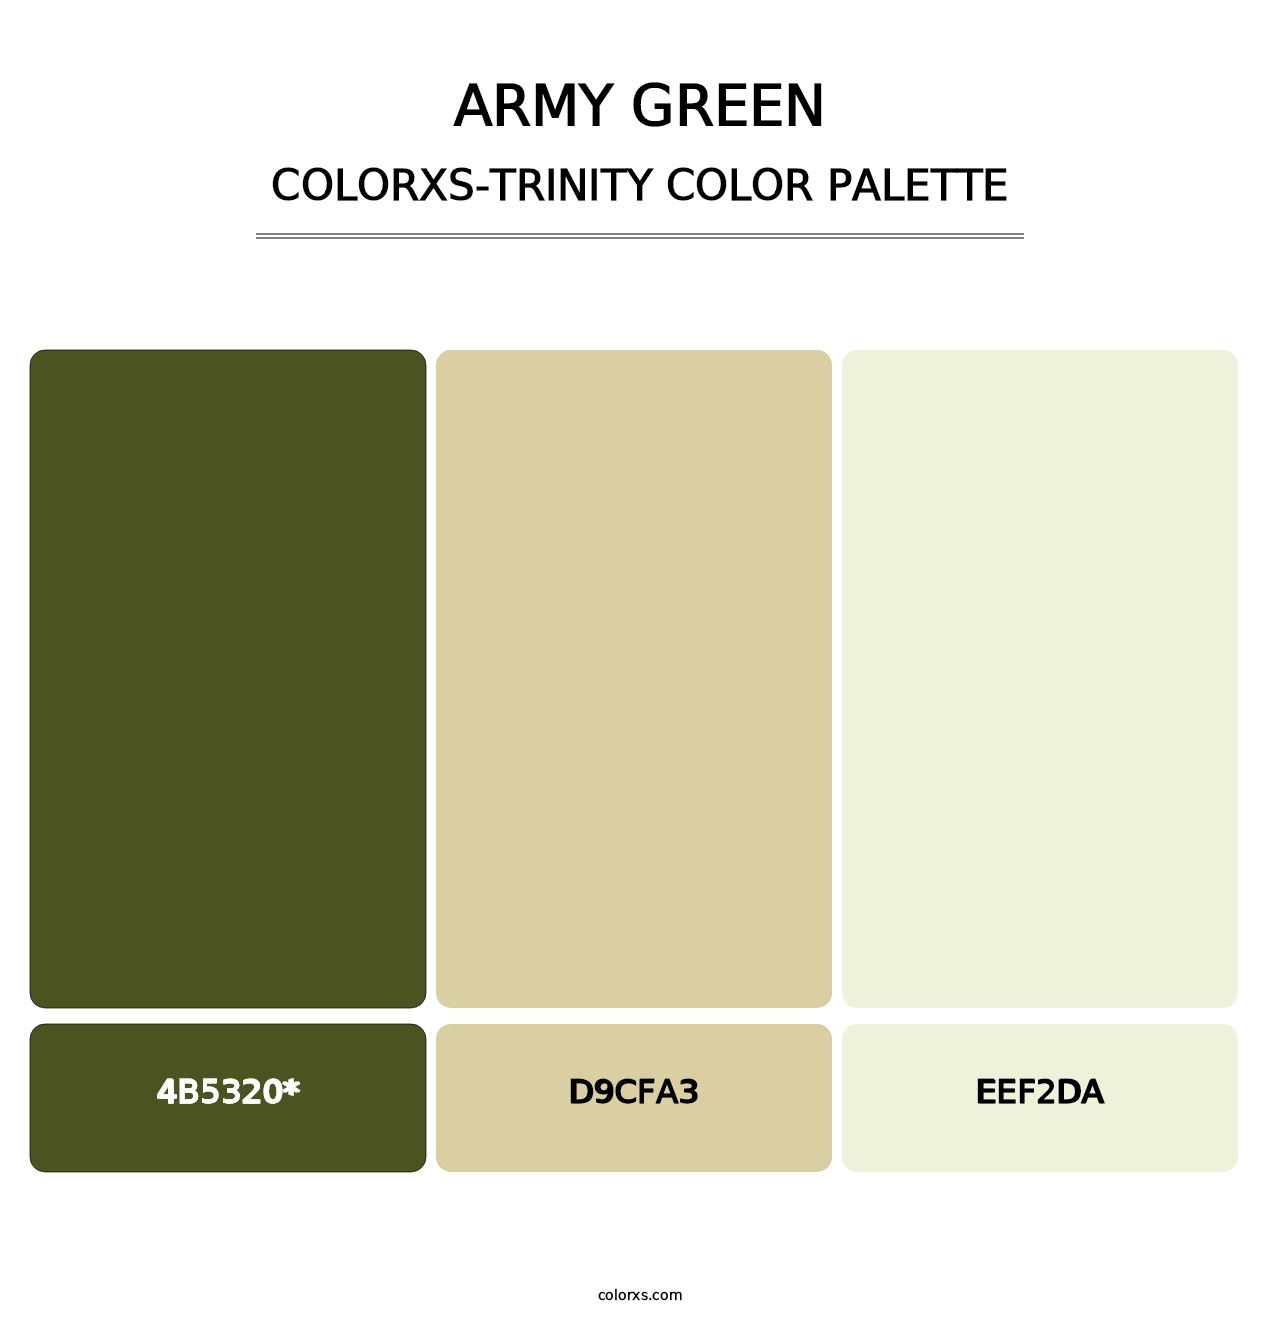 Army Green - Colorxs Trinity Palette